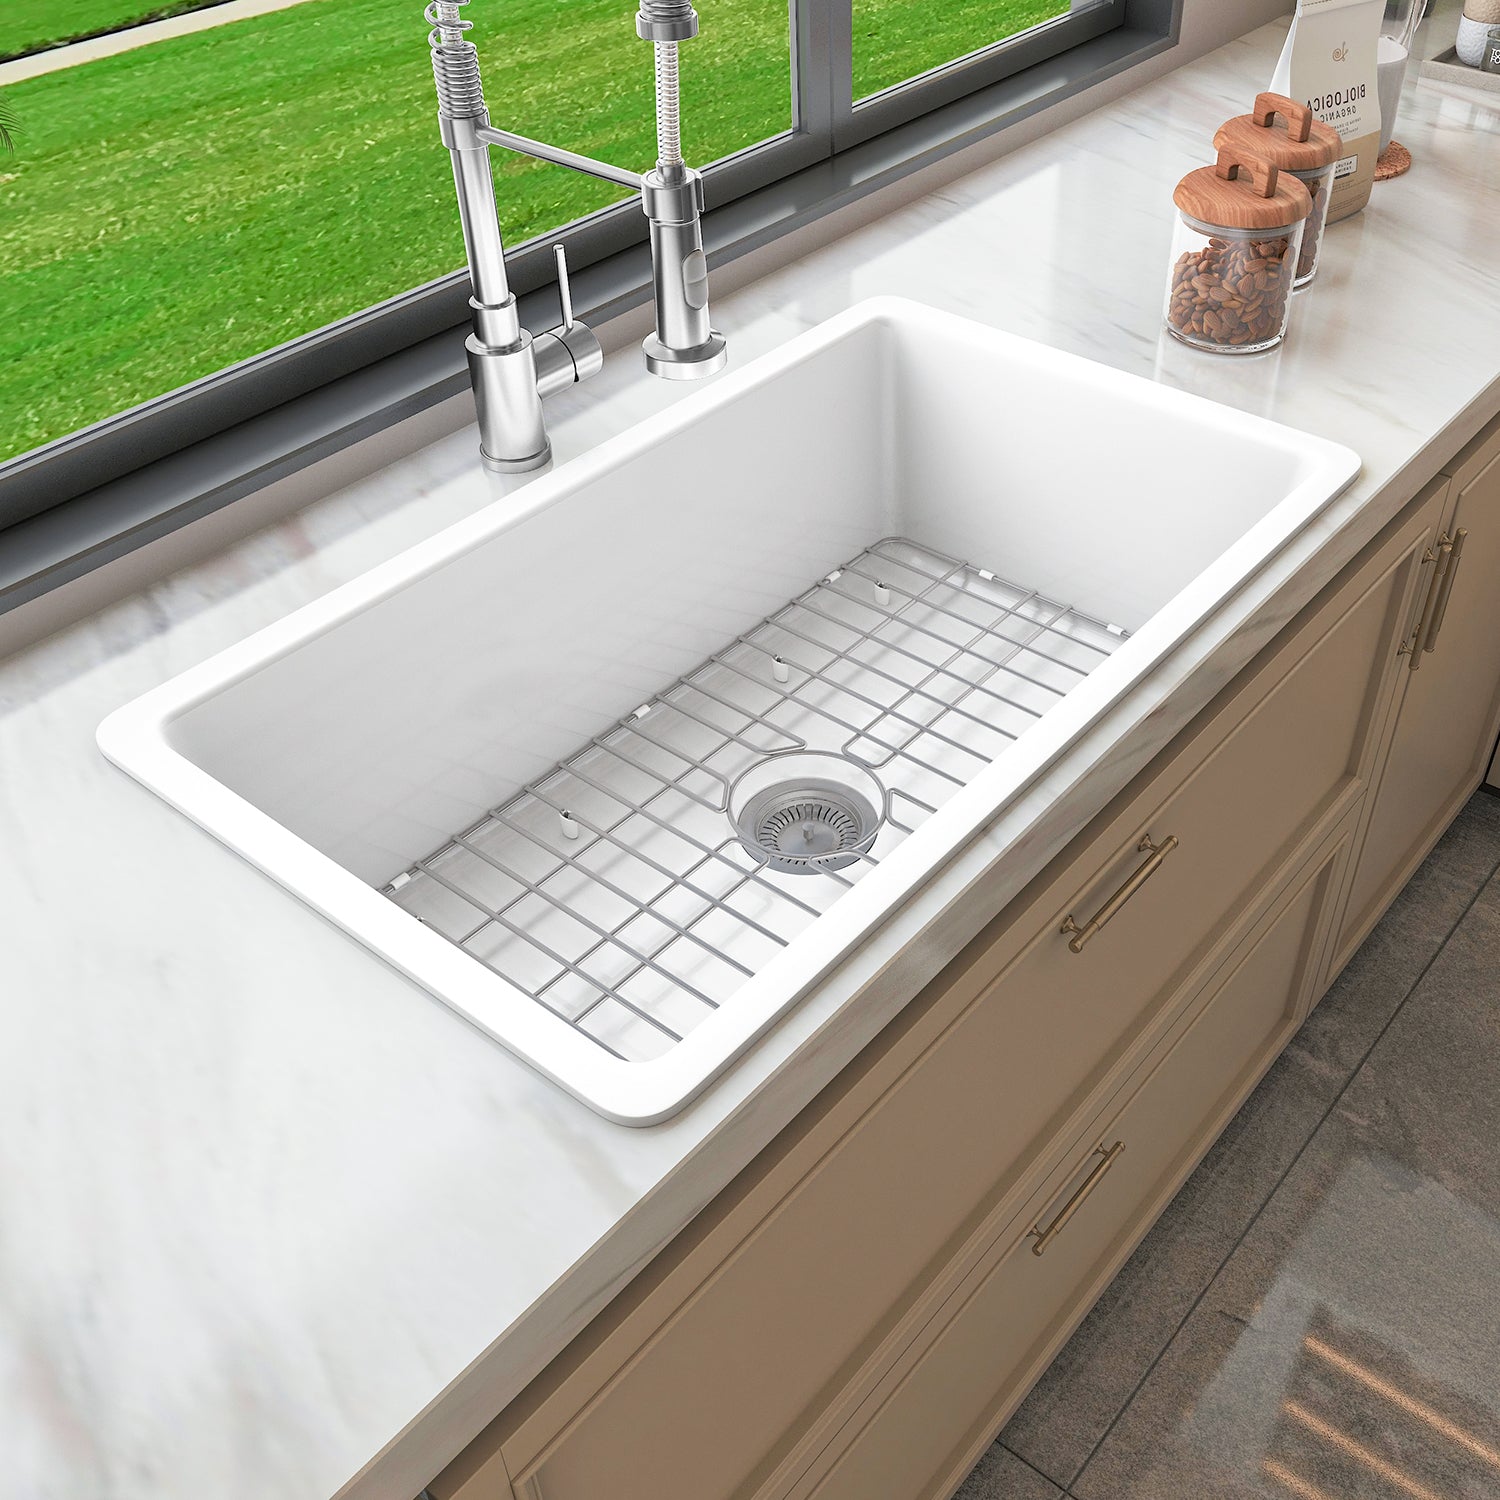 Sinber 32 Inch Drop in Single Bowl Kitchen Sink with Fireclay White Finish 2 Accessories F3219S-OL